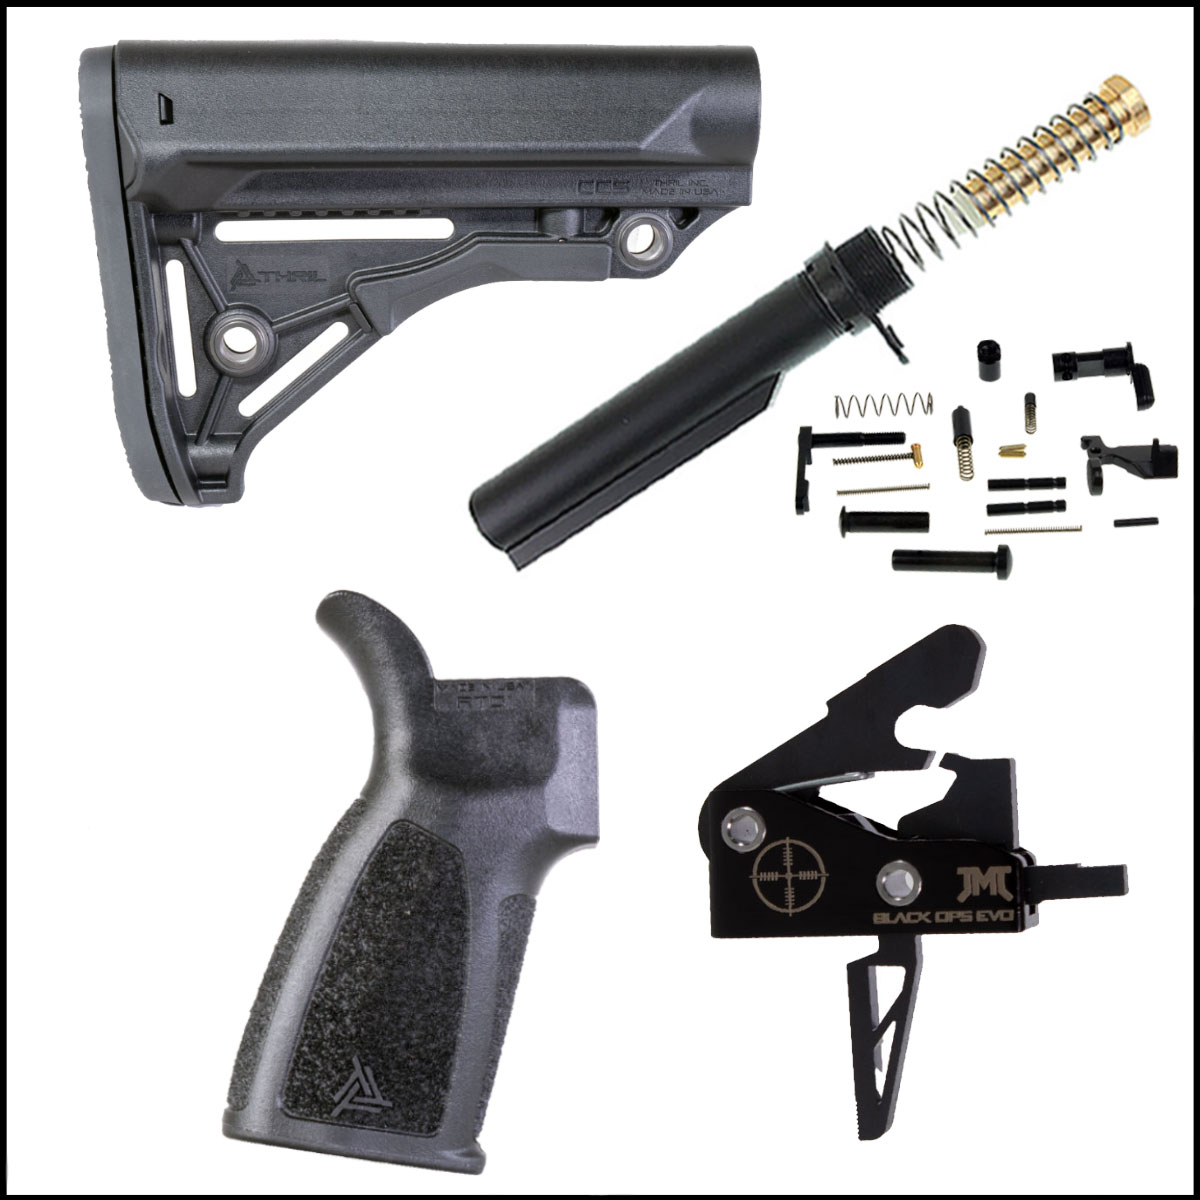 Finish Your Lower Kit: THRIL Combat Stock Tactical Grip + Mil-Spec Buffer Tube + AR-15 Carbine Recoil Spring + Mil-Spec Receiver End Plate +  AR-15 Carbine Recoil Buffer +Tactical Grip + CMMG Lower Parts Kit + James Madison Drop-In Trigger